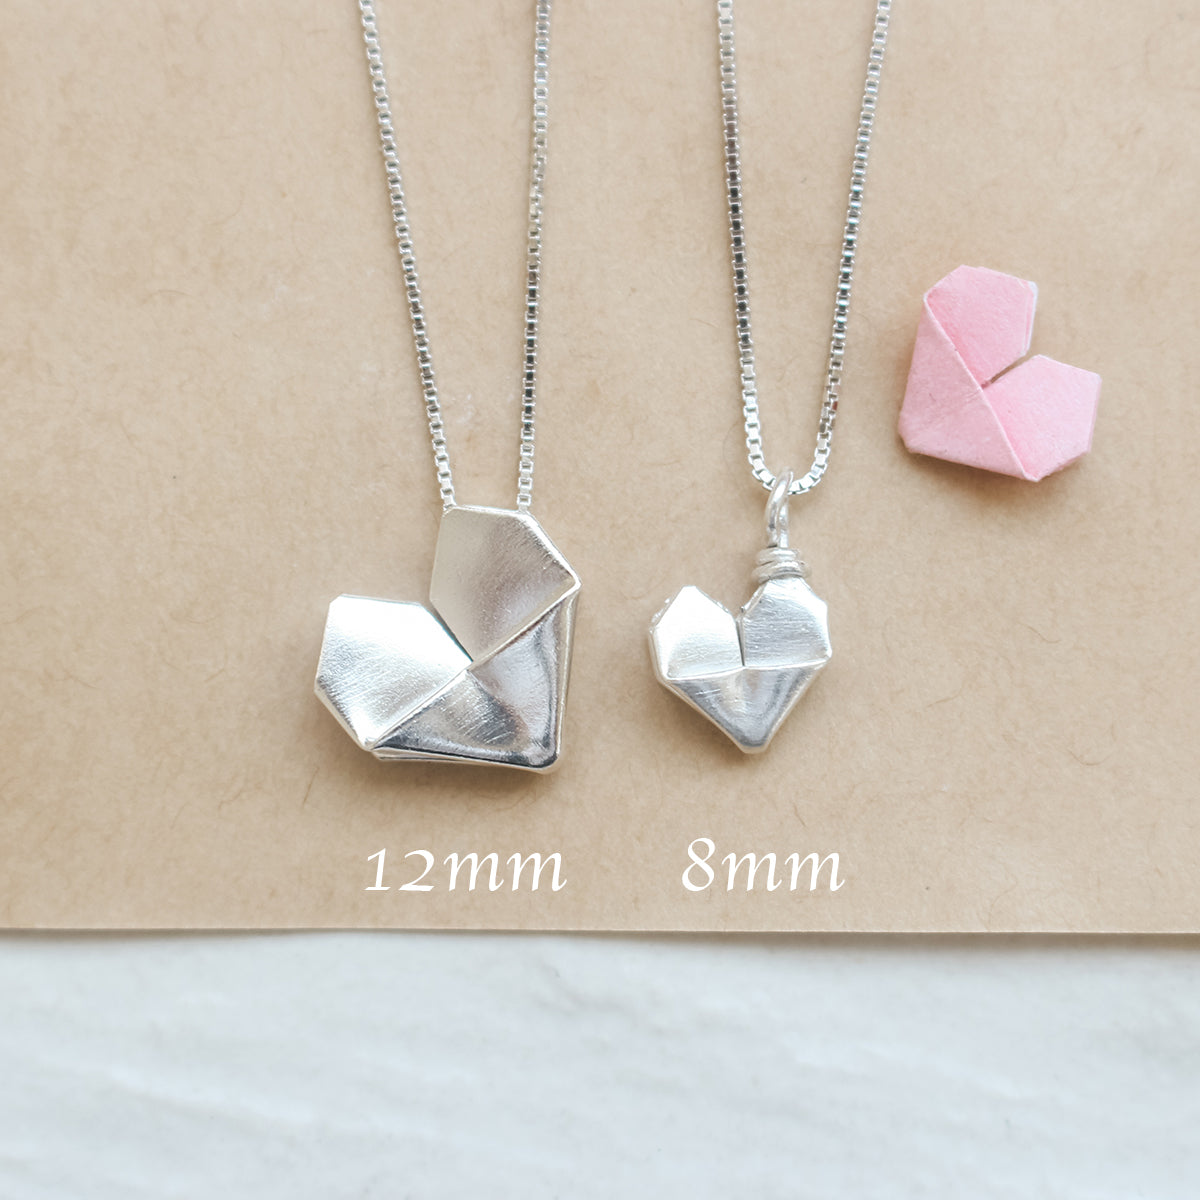 Origami Silver Heart Necklace / Sterling Silver Paper Heart Necklace / Folding Heart Necklace